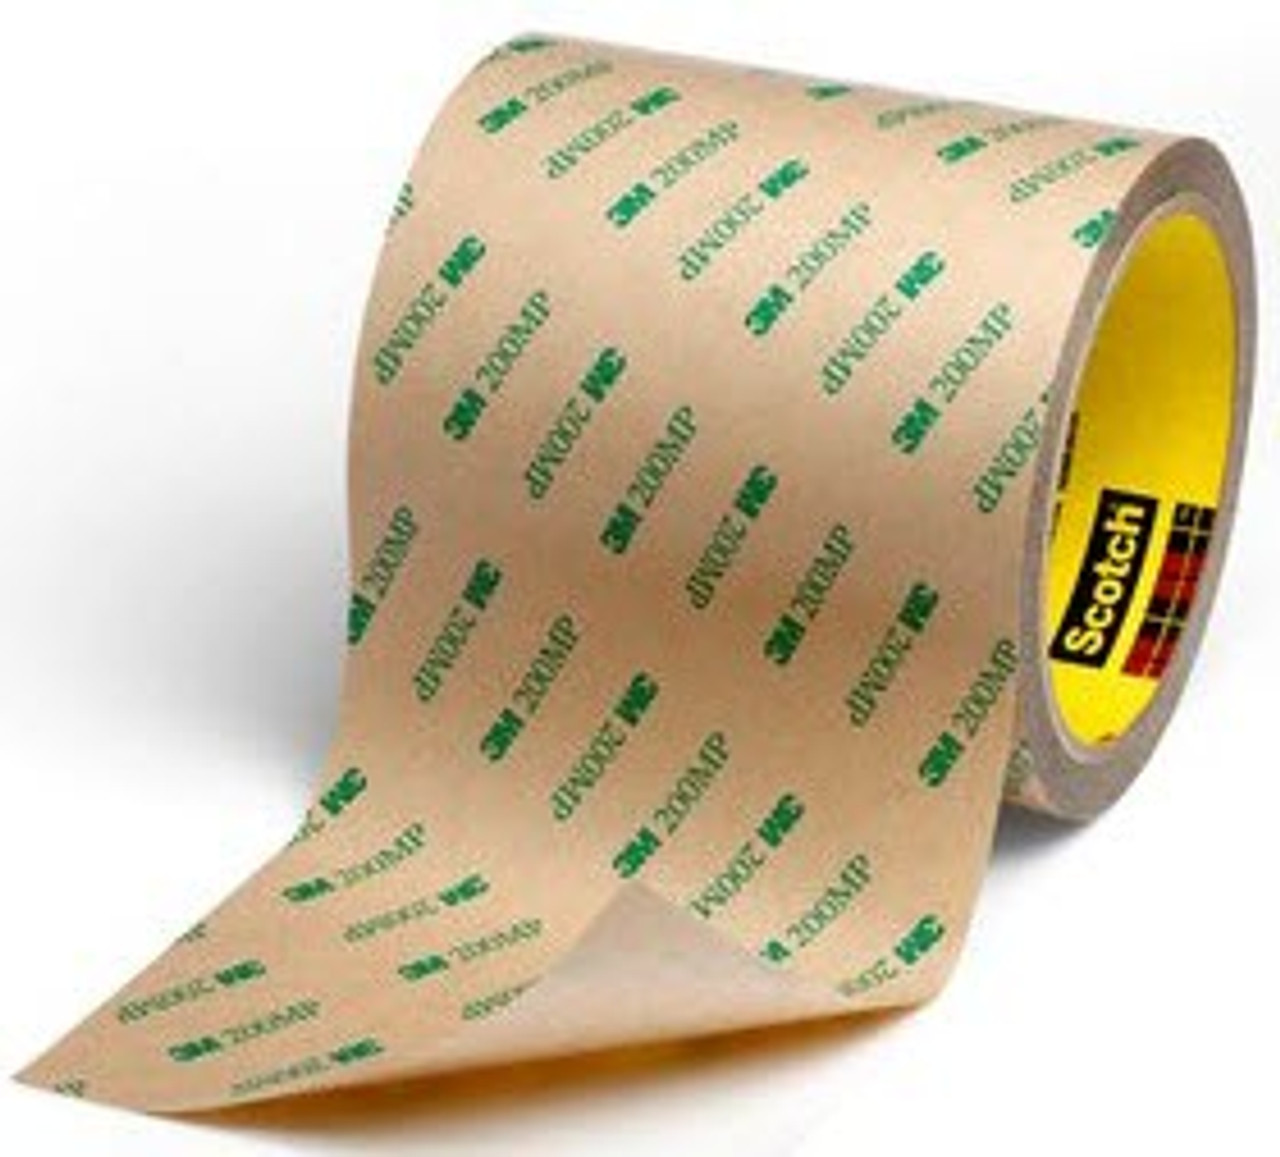 Adhesive Tape Measure - 36 Strips - Inches - Yellow